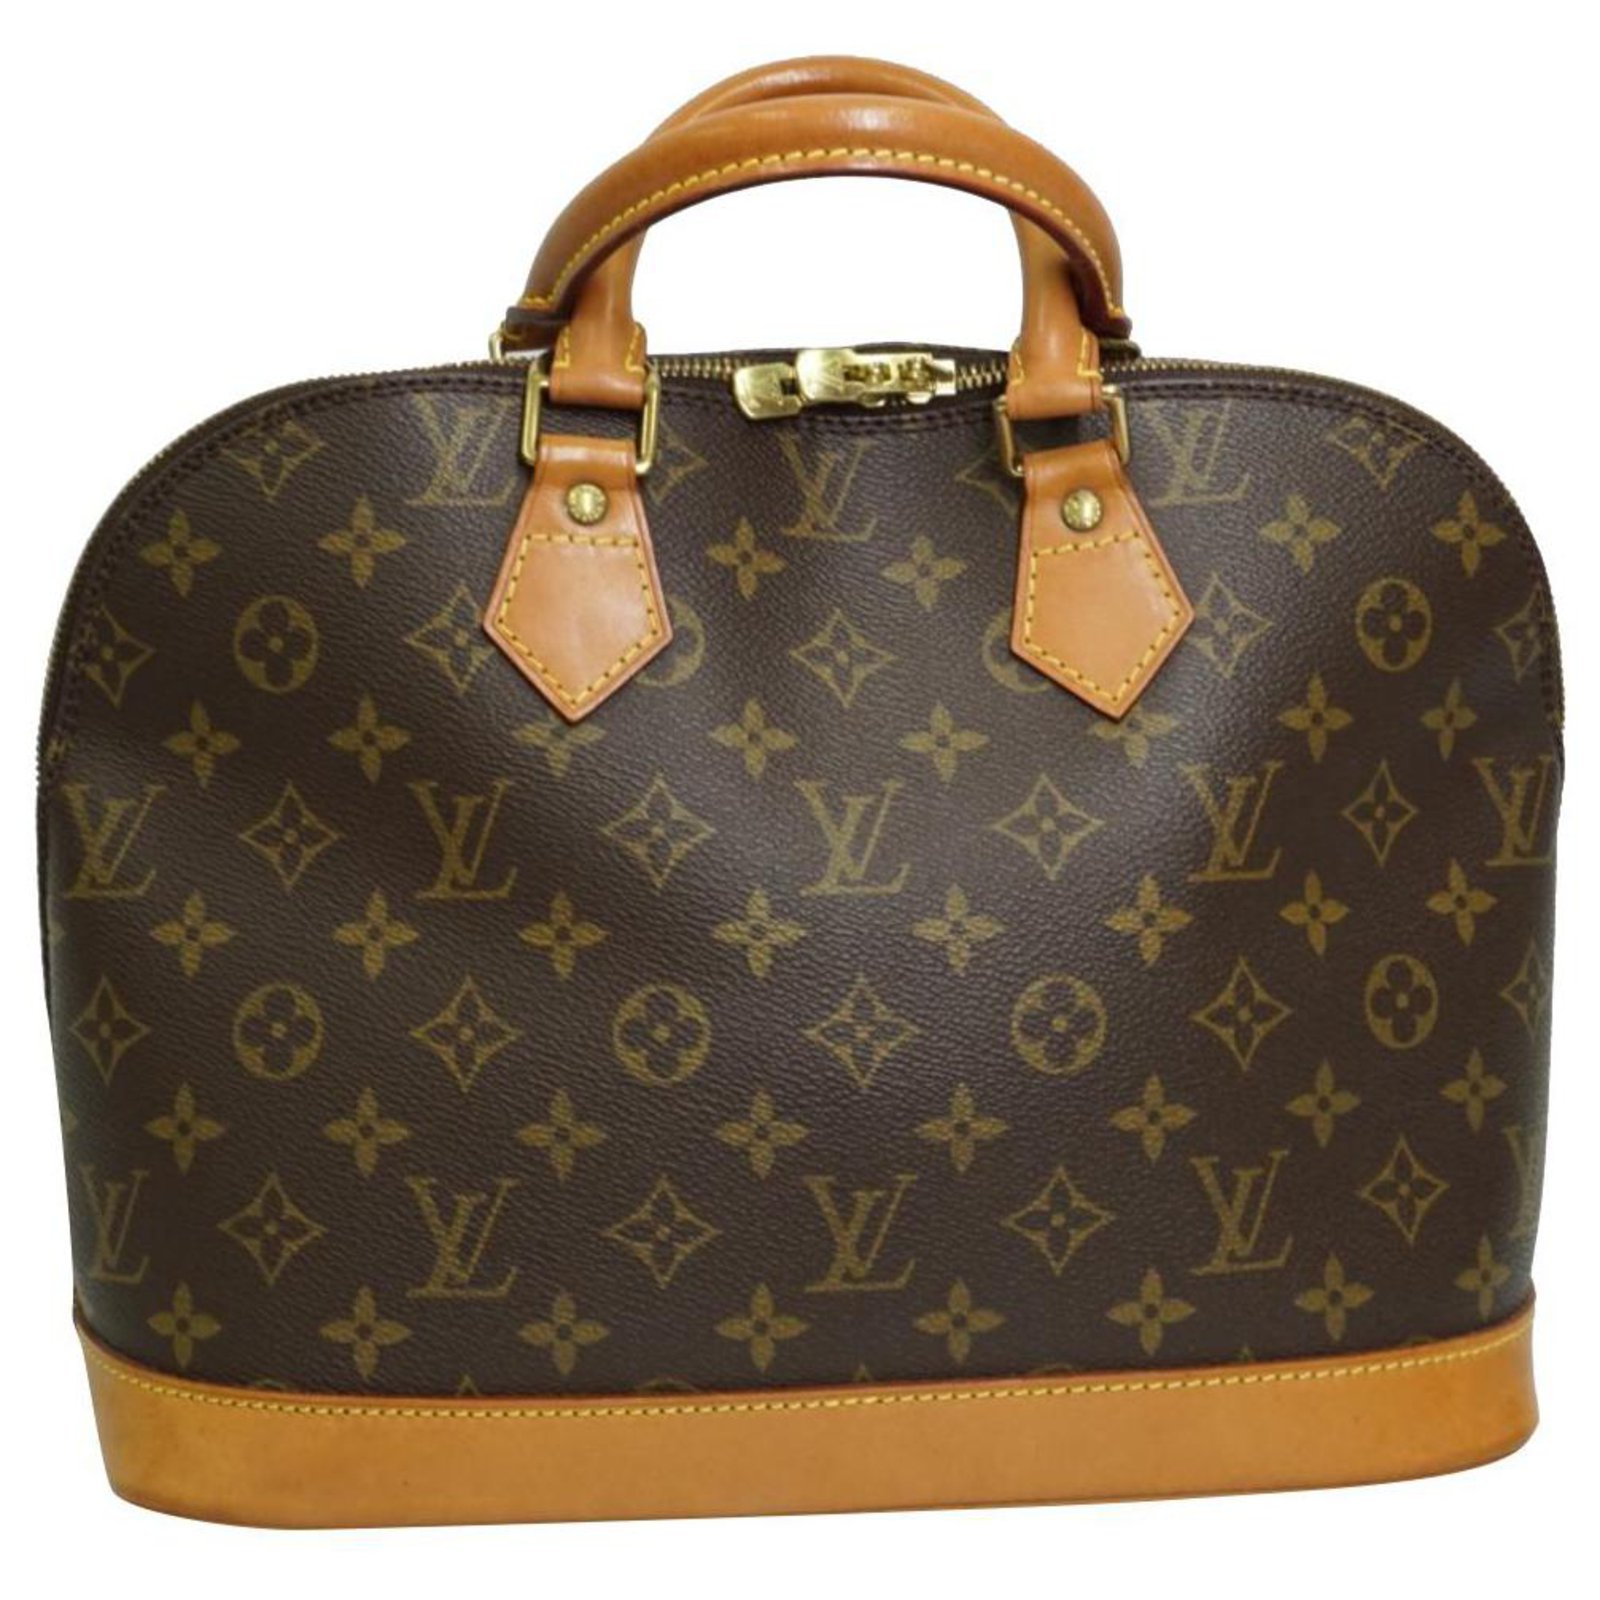 Louis Vuitton - Simplicity and elegance in design. The Vuitton New